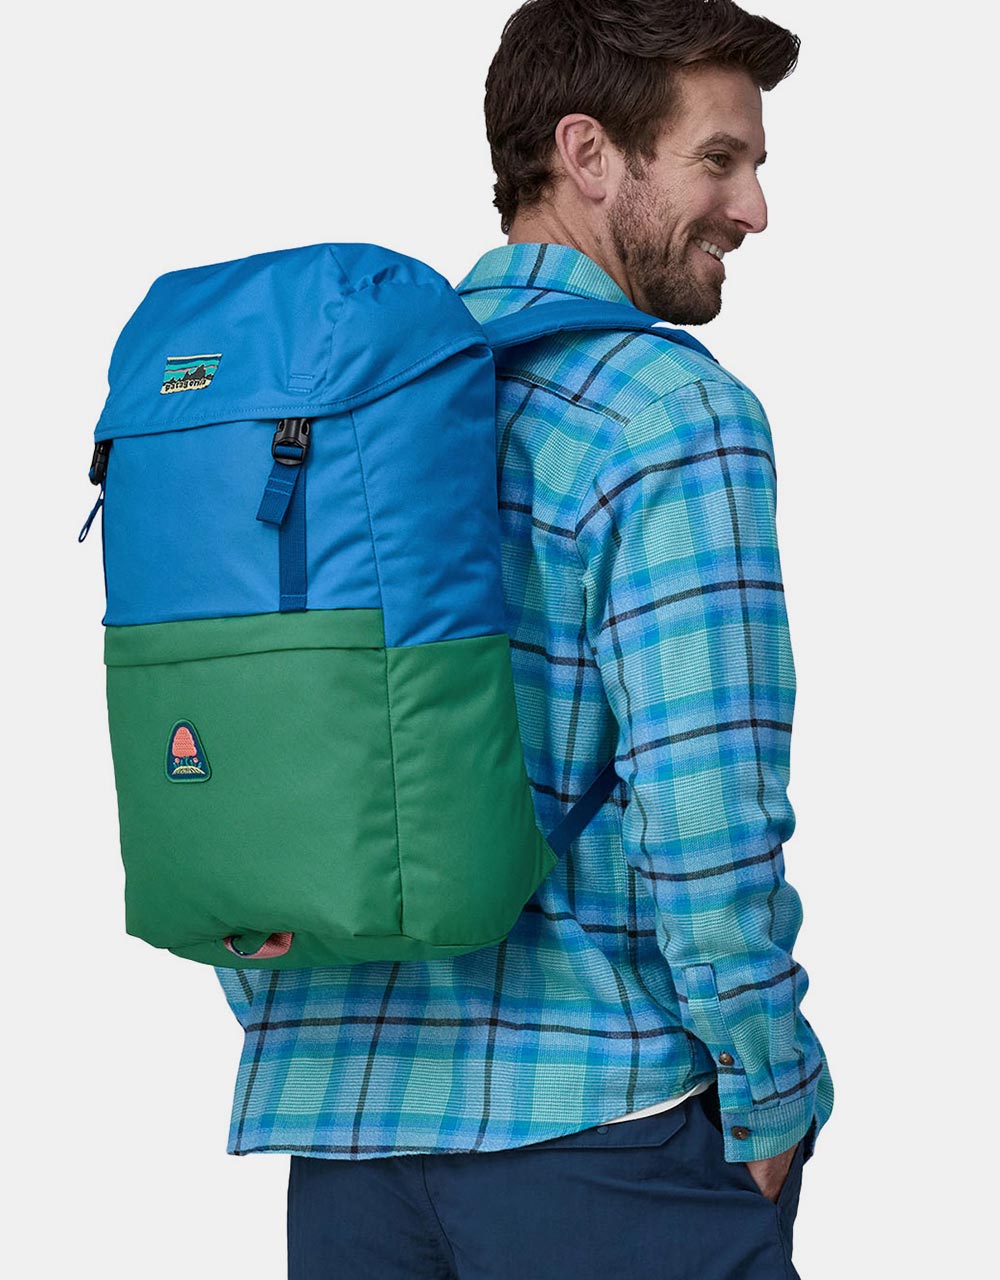 Patagonia Fieldsmith Lid Pack - Gather Green